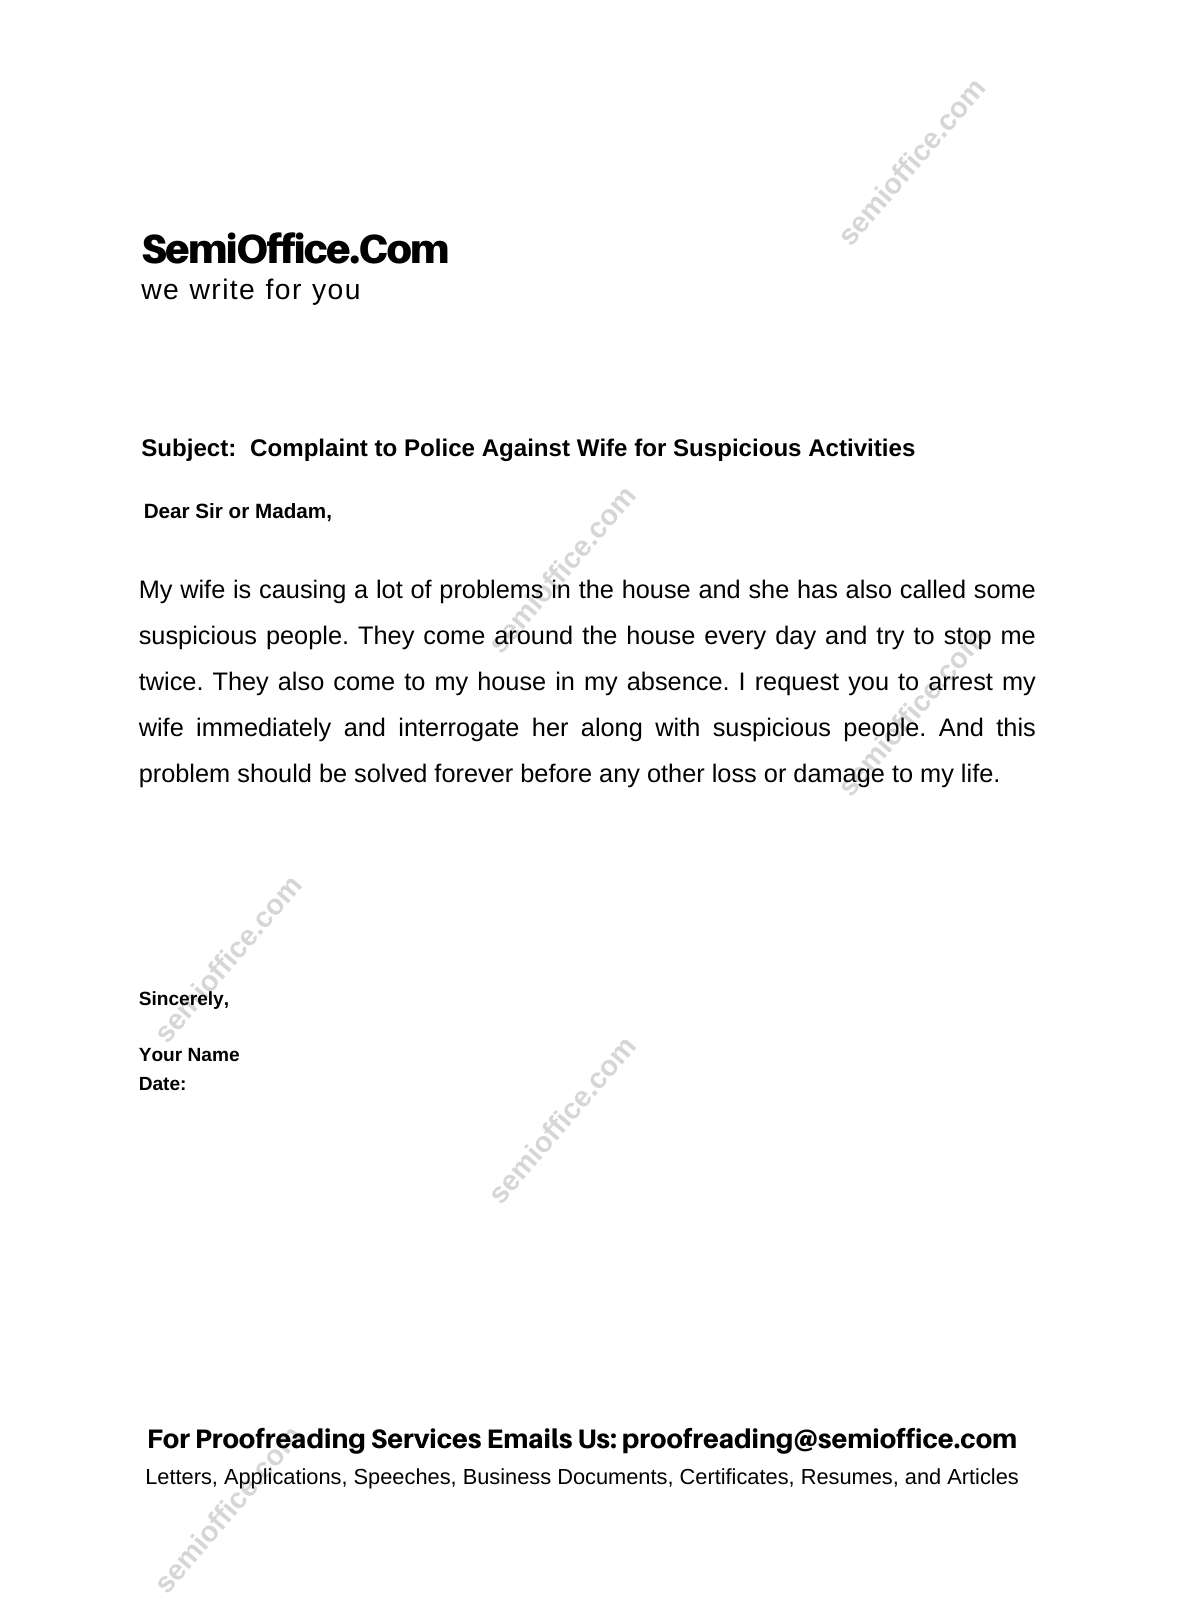 Complaint Letter to Police Station Against Wife SemiOffice